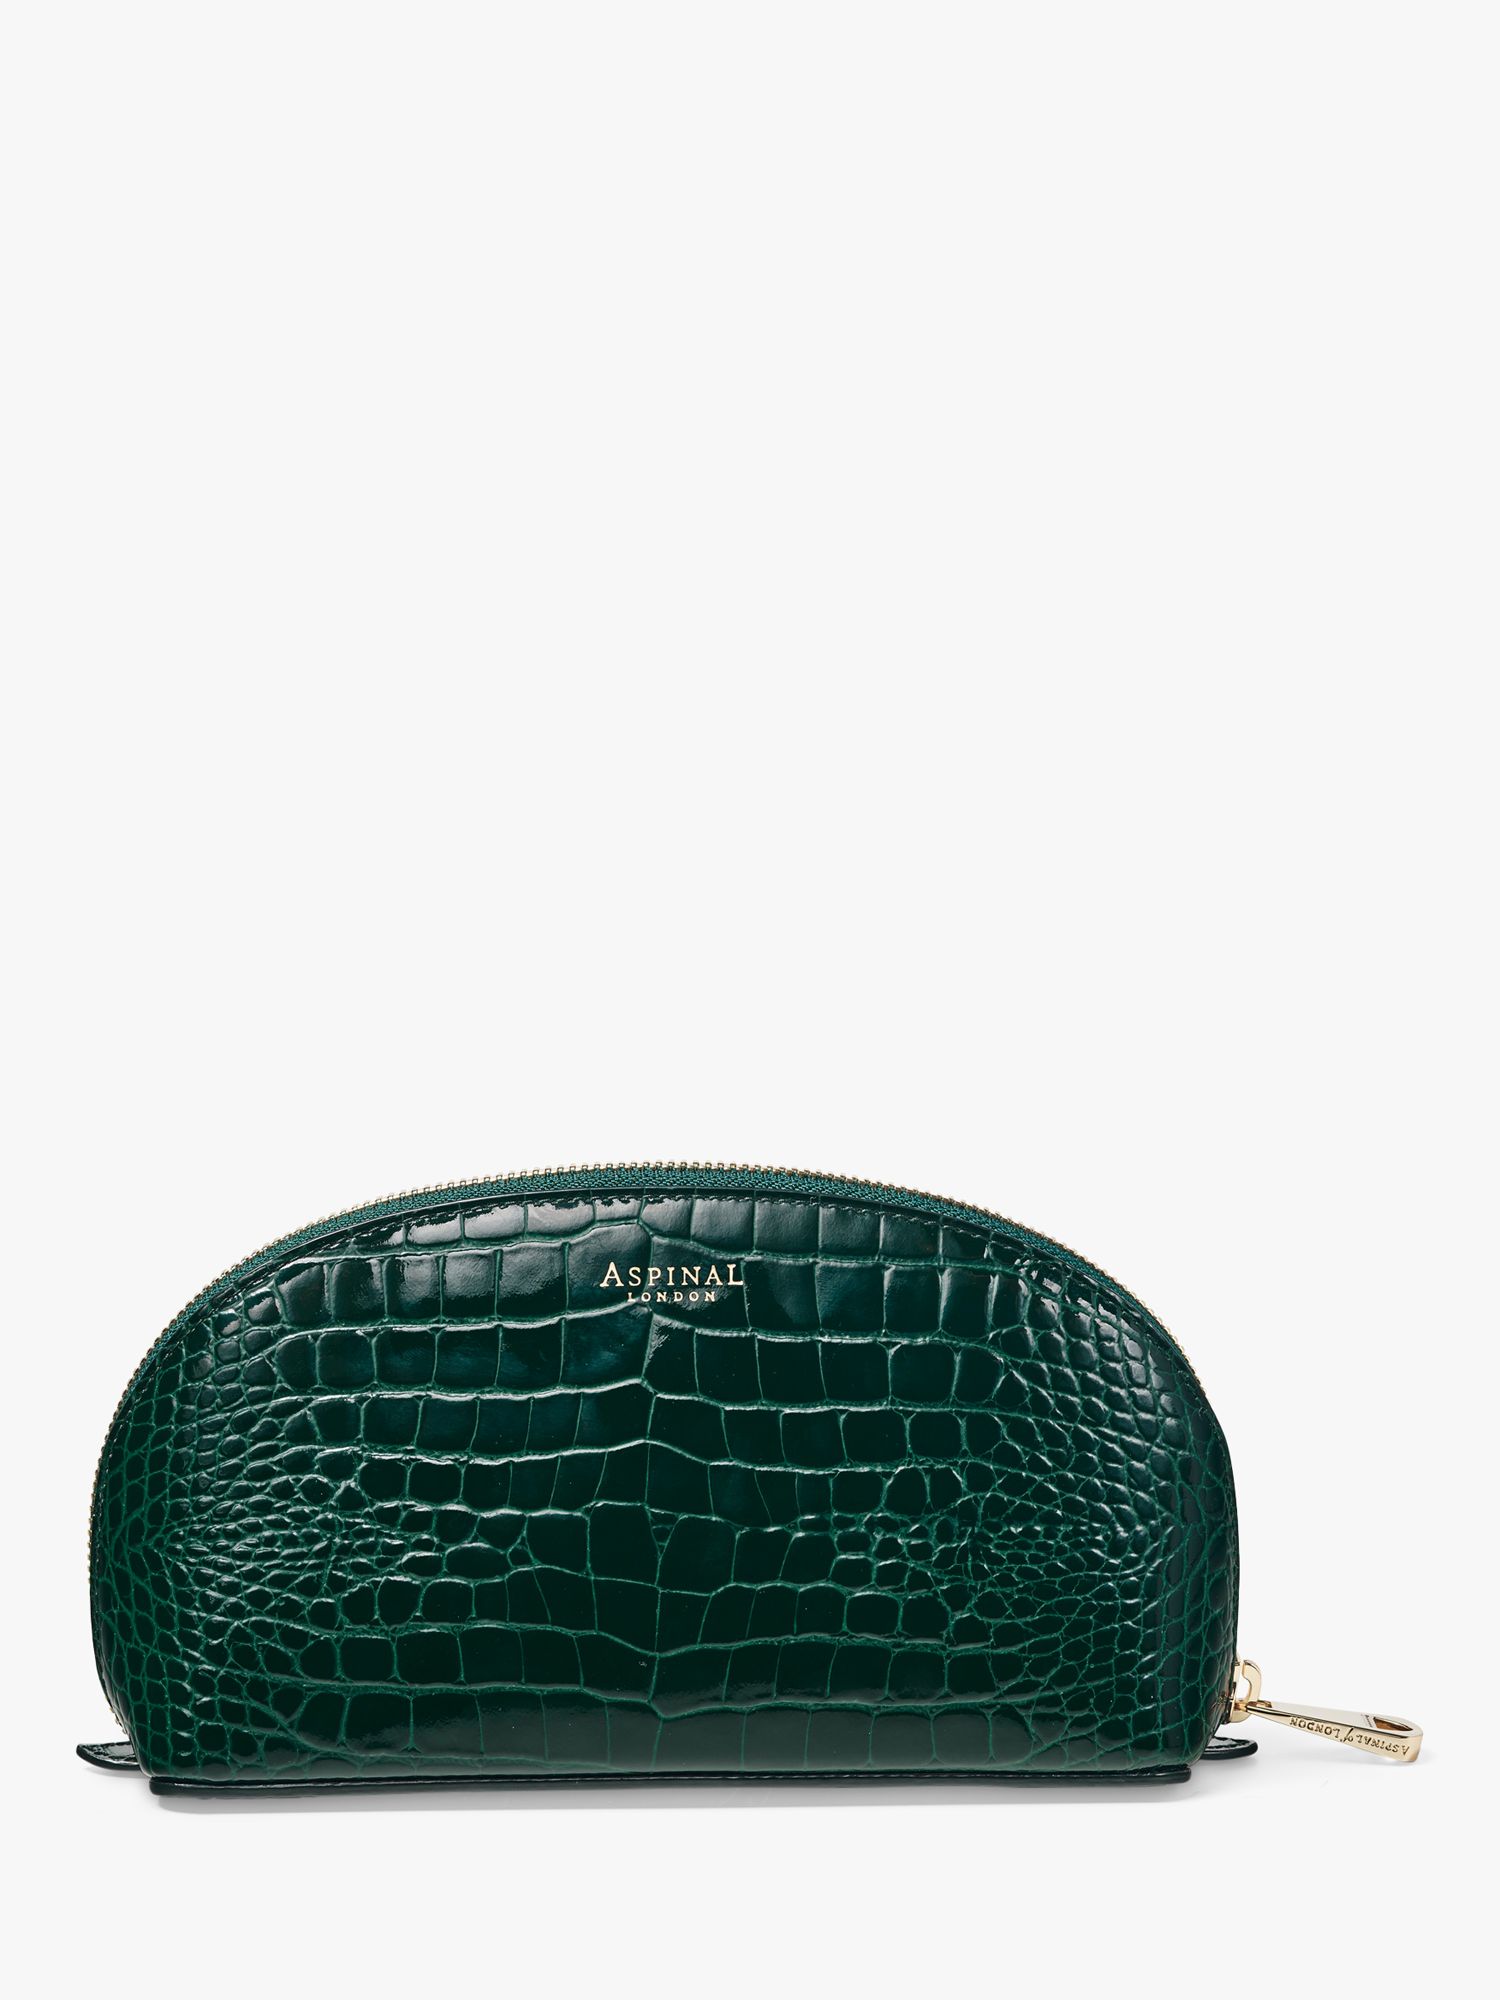 Aspinal of London Small Croc Effect Leather Cosmetic Case, Evergreen 2